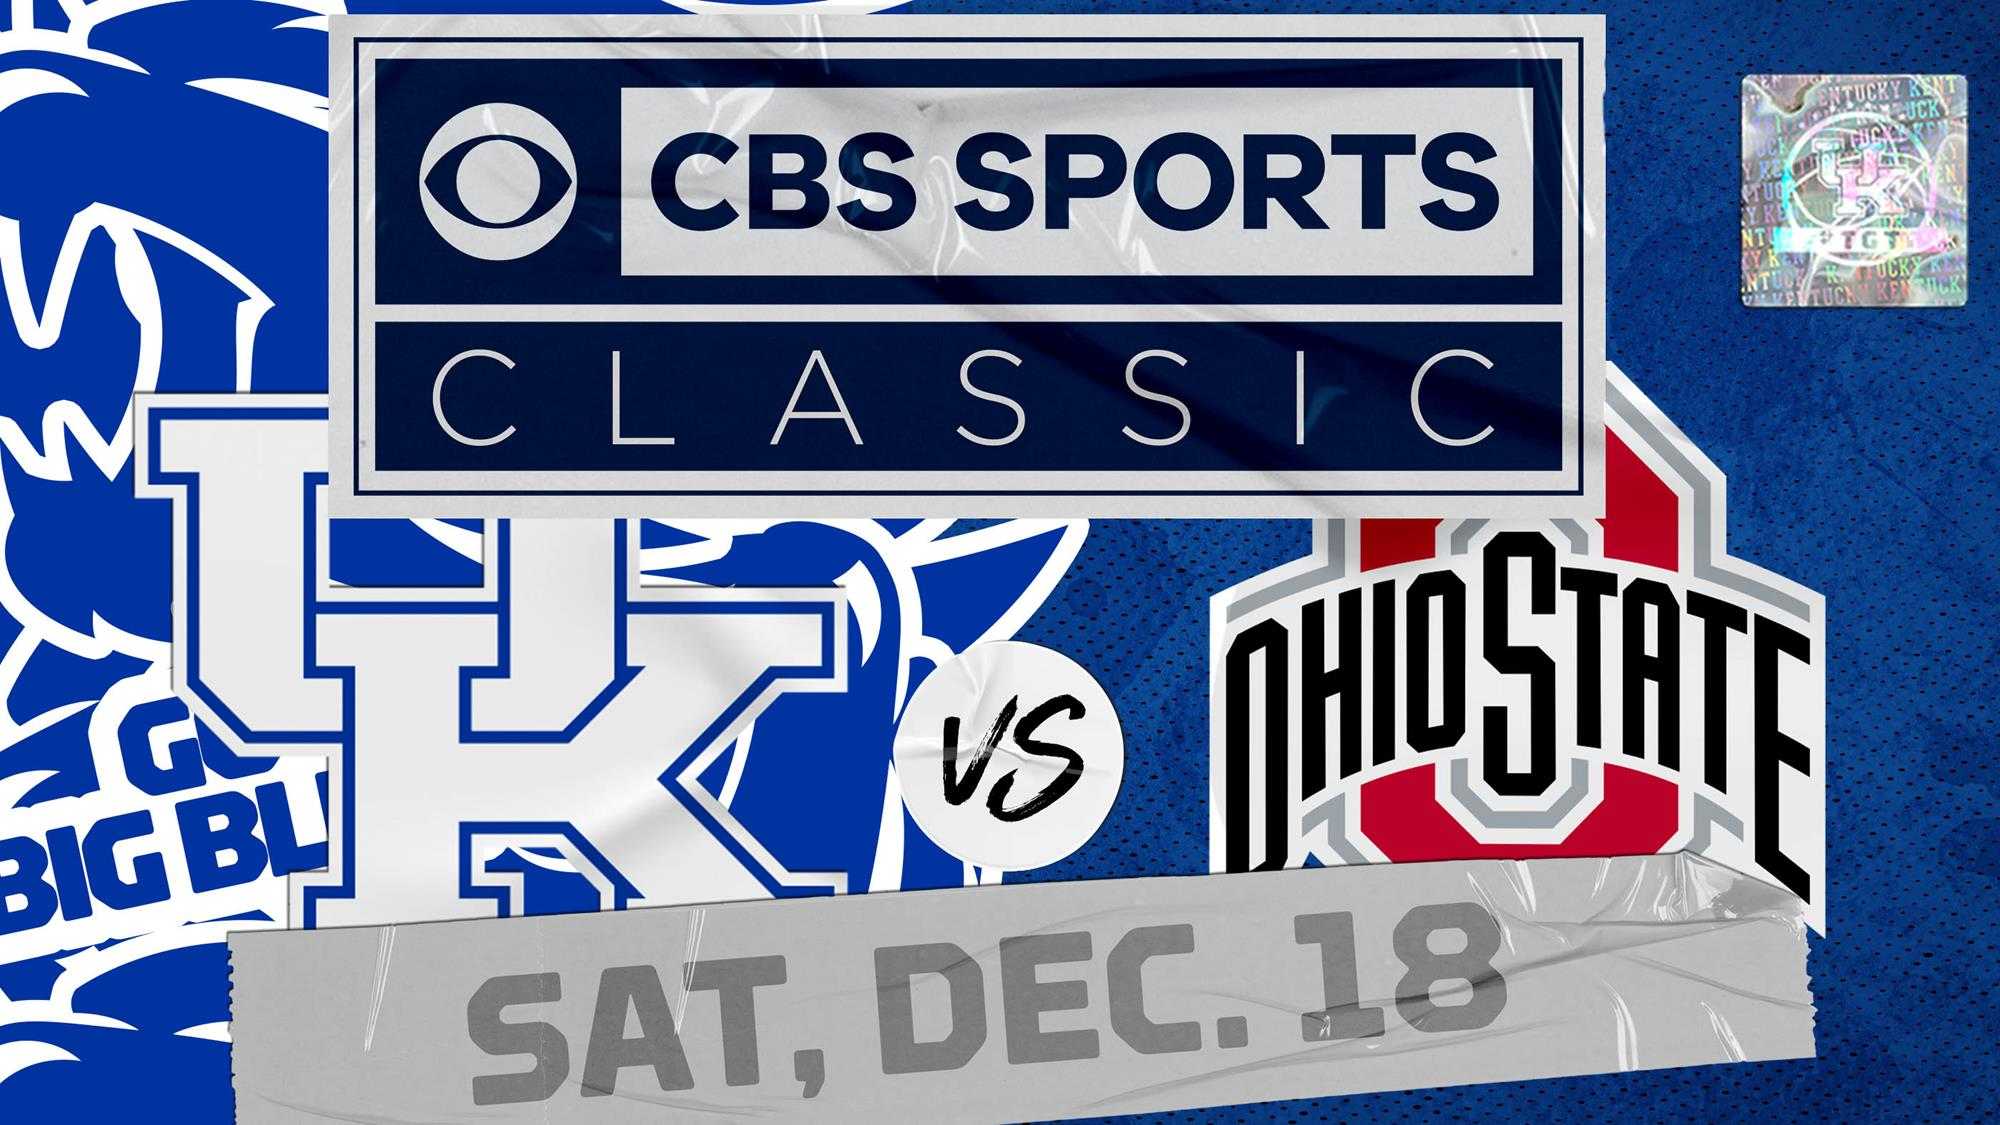 Kentucky Men’s Basketball to Face Ohio State in CBS Sports Classic in Las Vegas